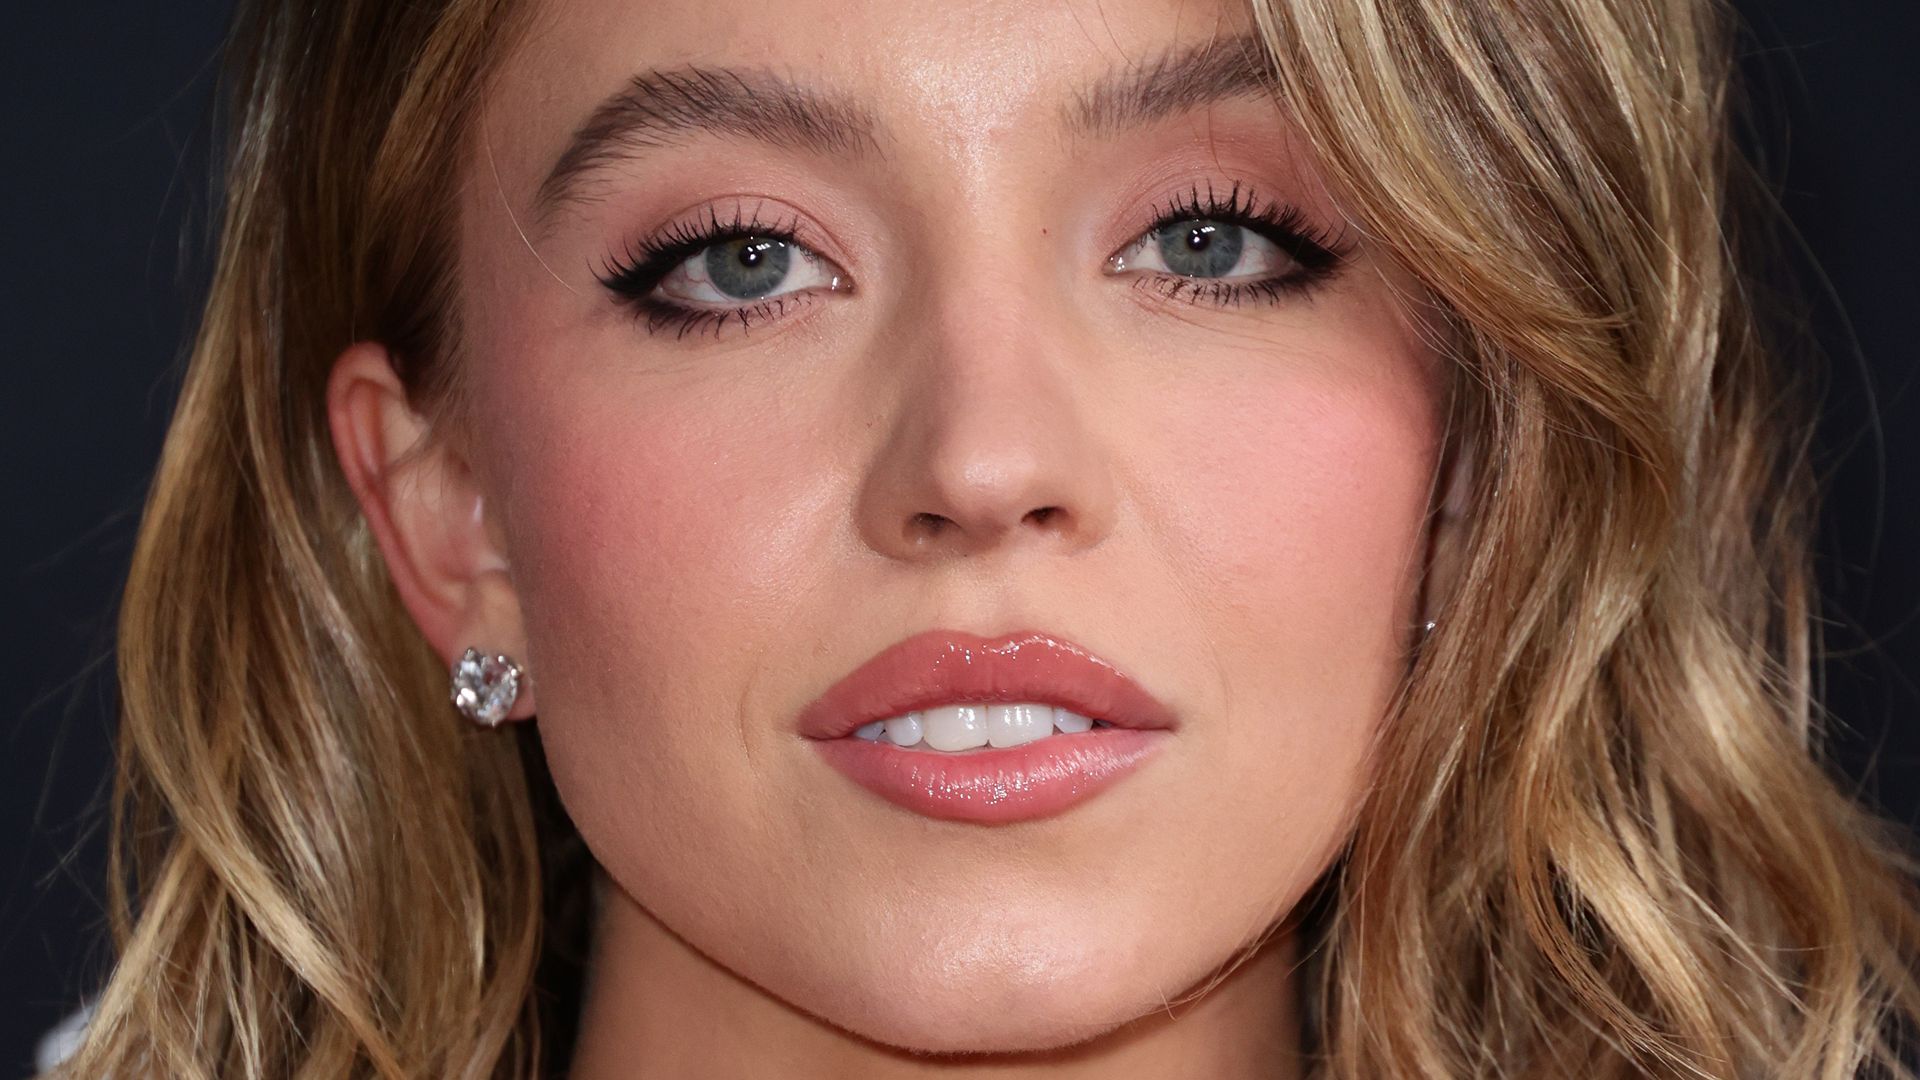 Sydney Sweeney's tropical bikini is giving major out-of-office vibes